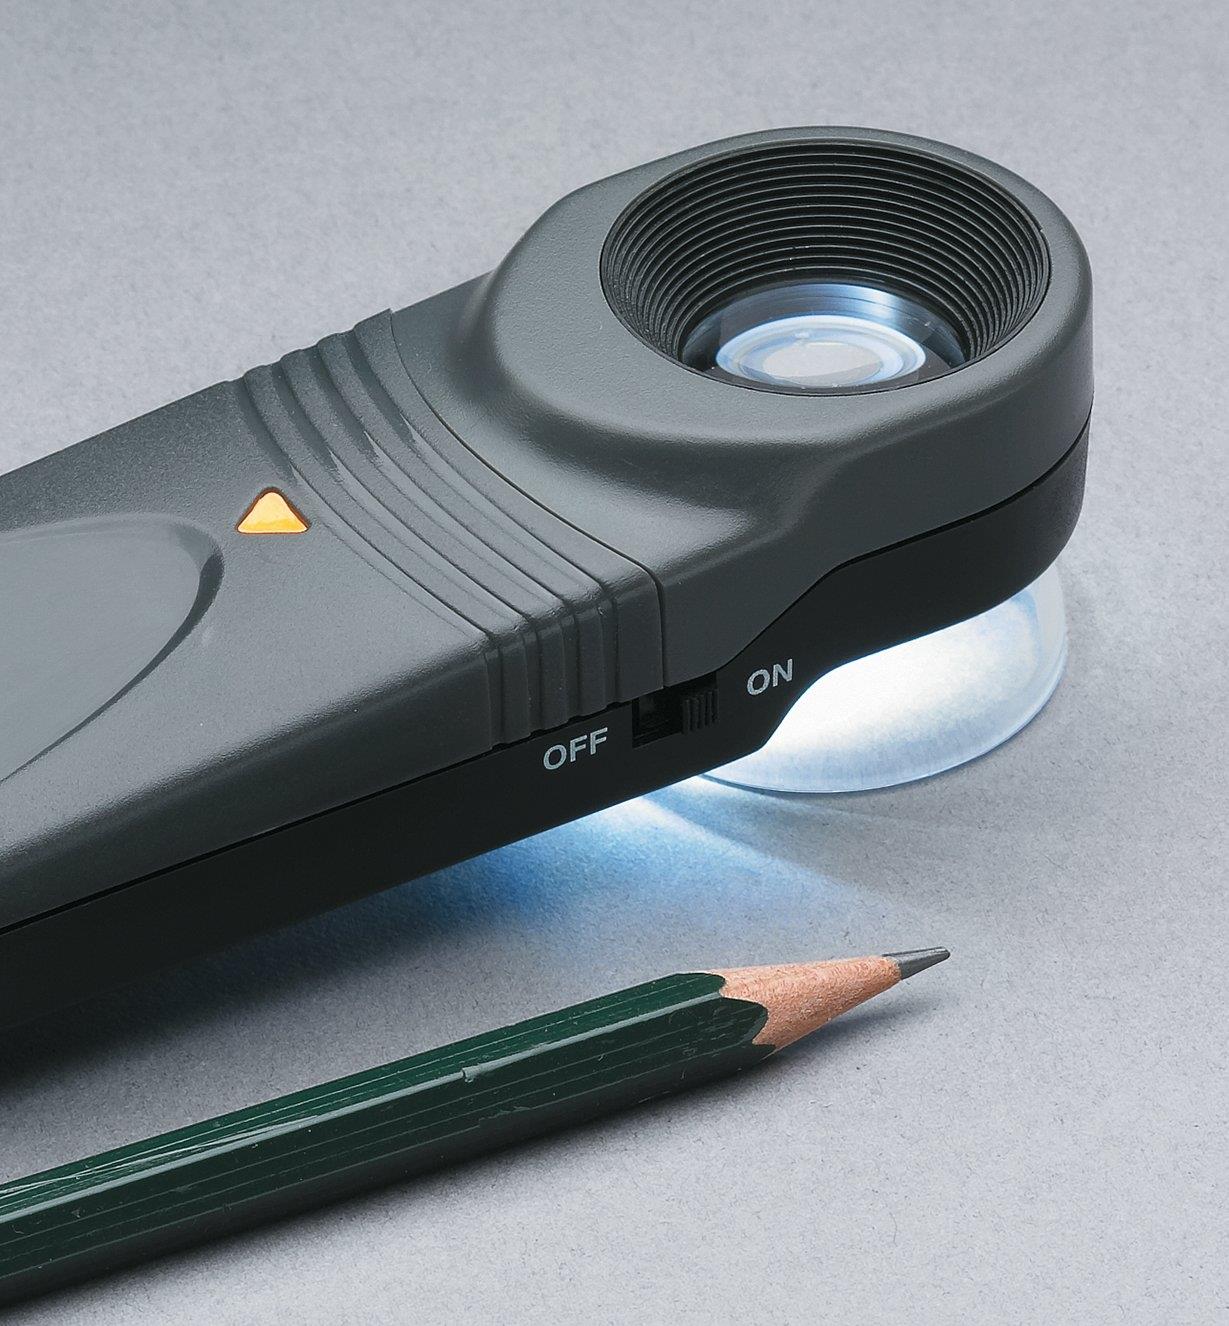 15-Power Lighted Loupe next to a pencil